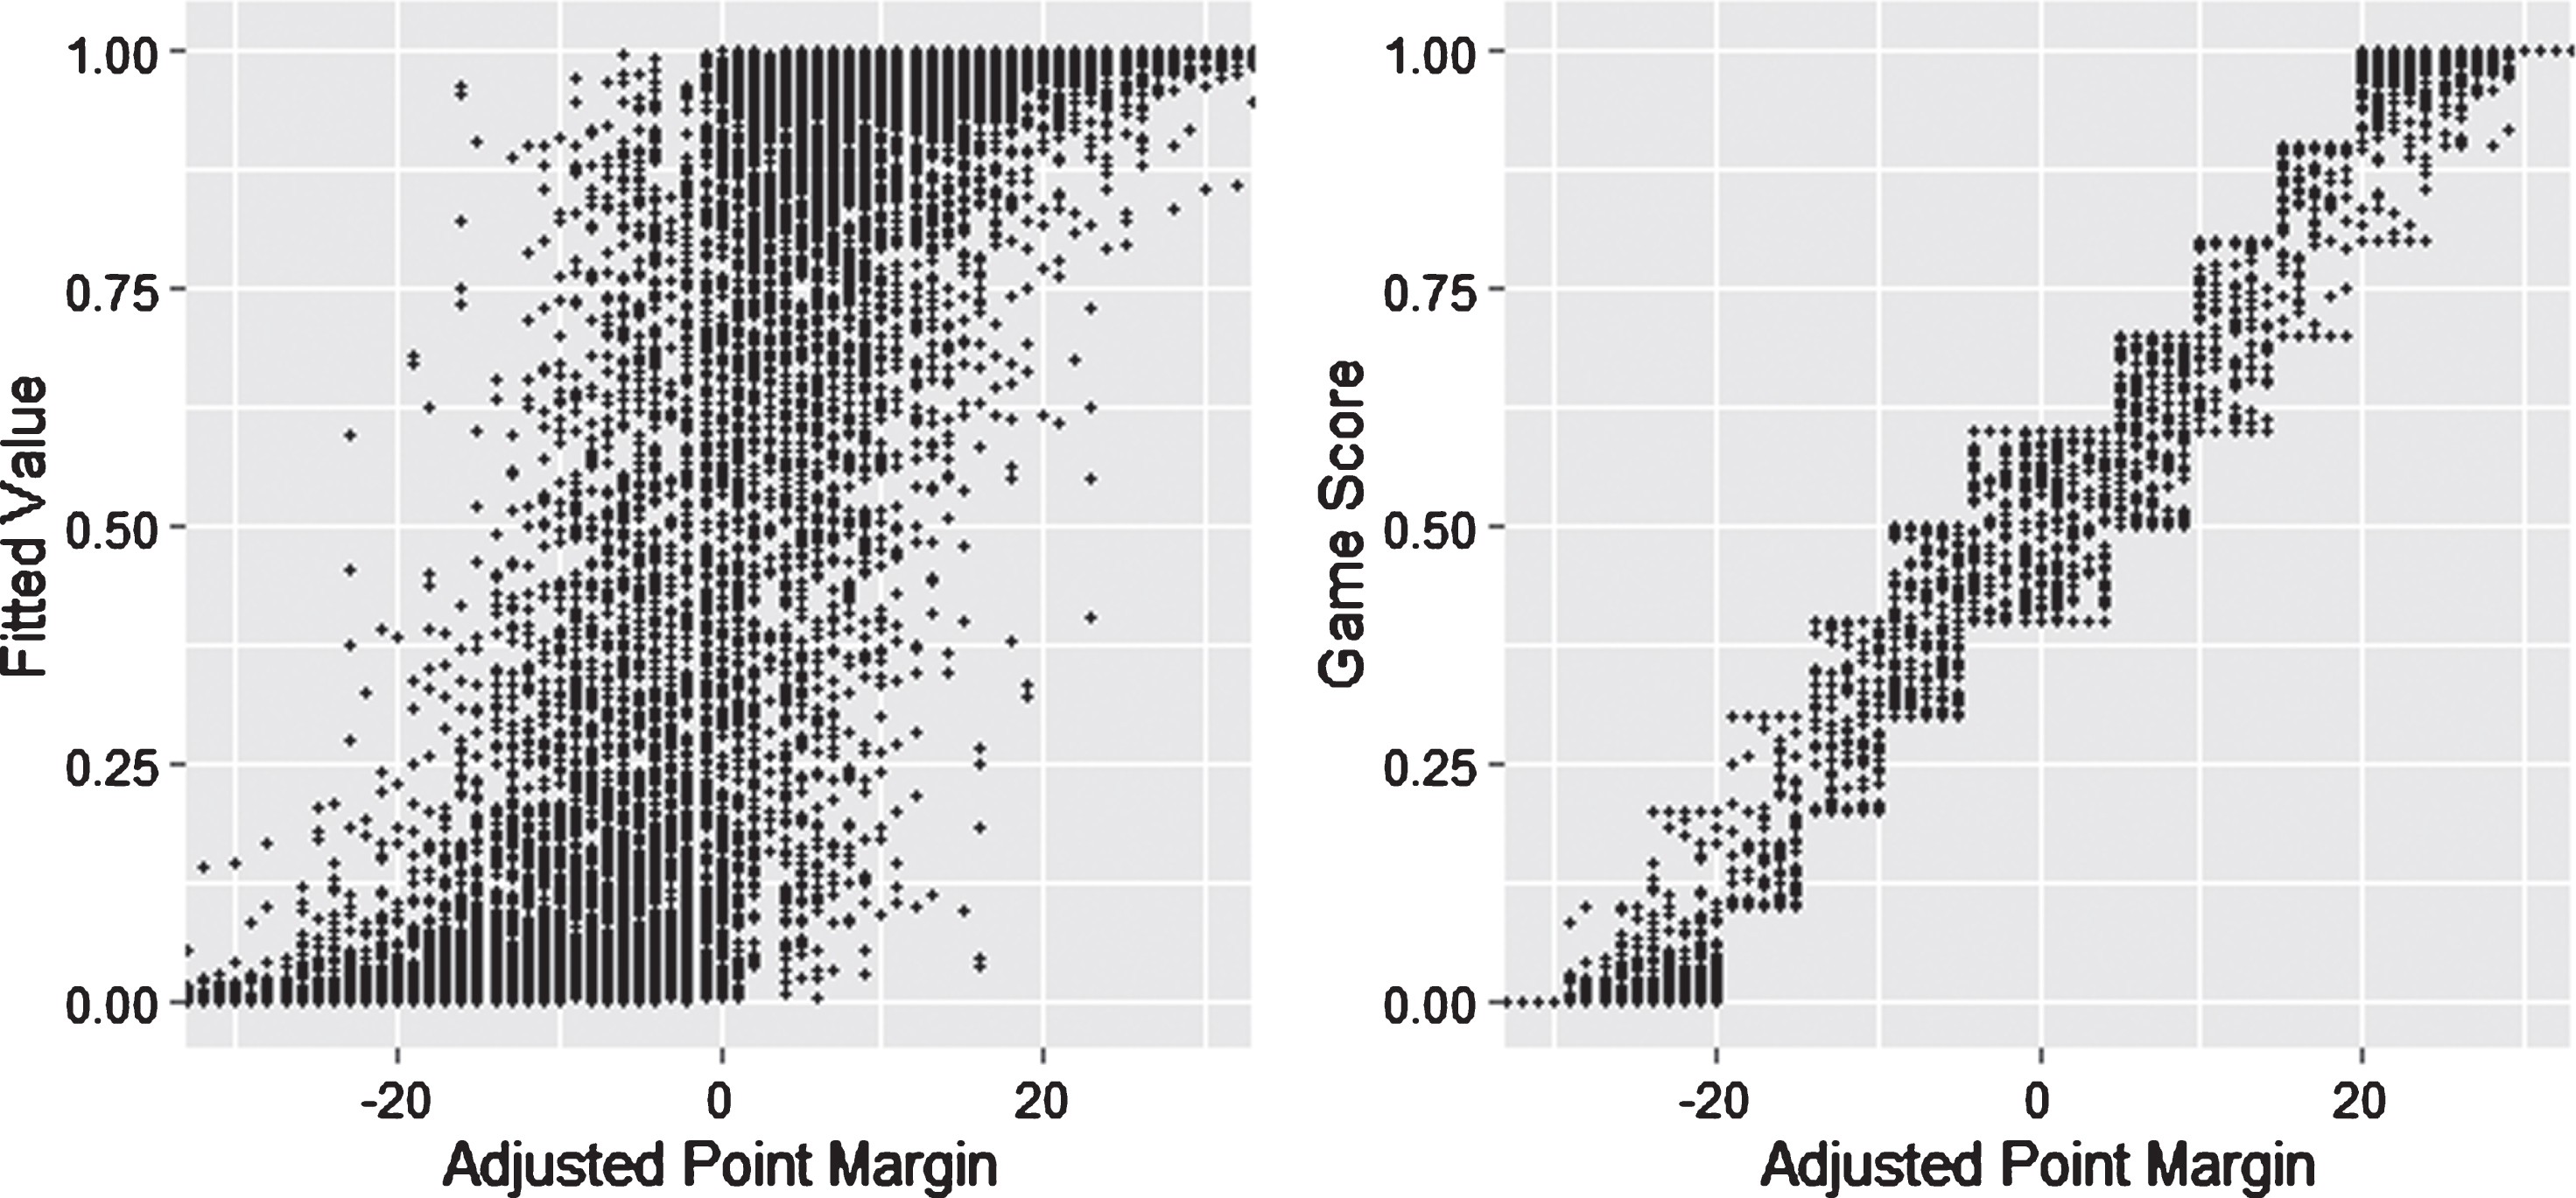 How the Adjusted Point Margin Correction Turns a Fitted Value Into a Game Score.